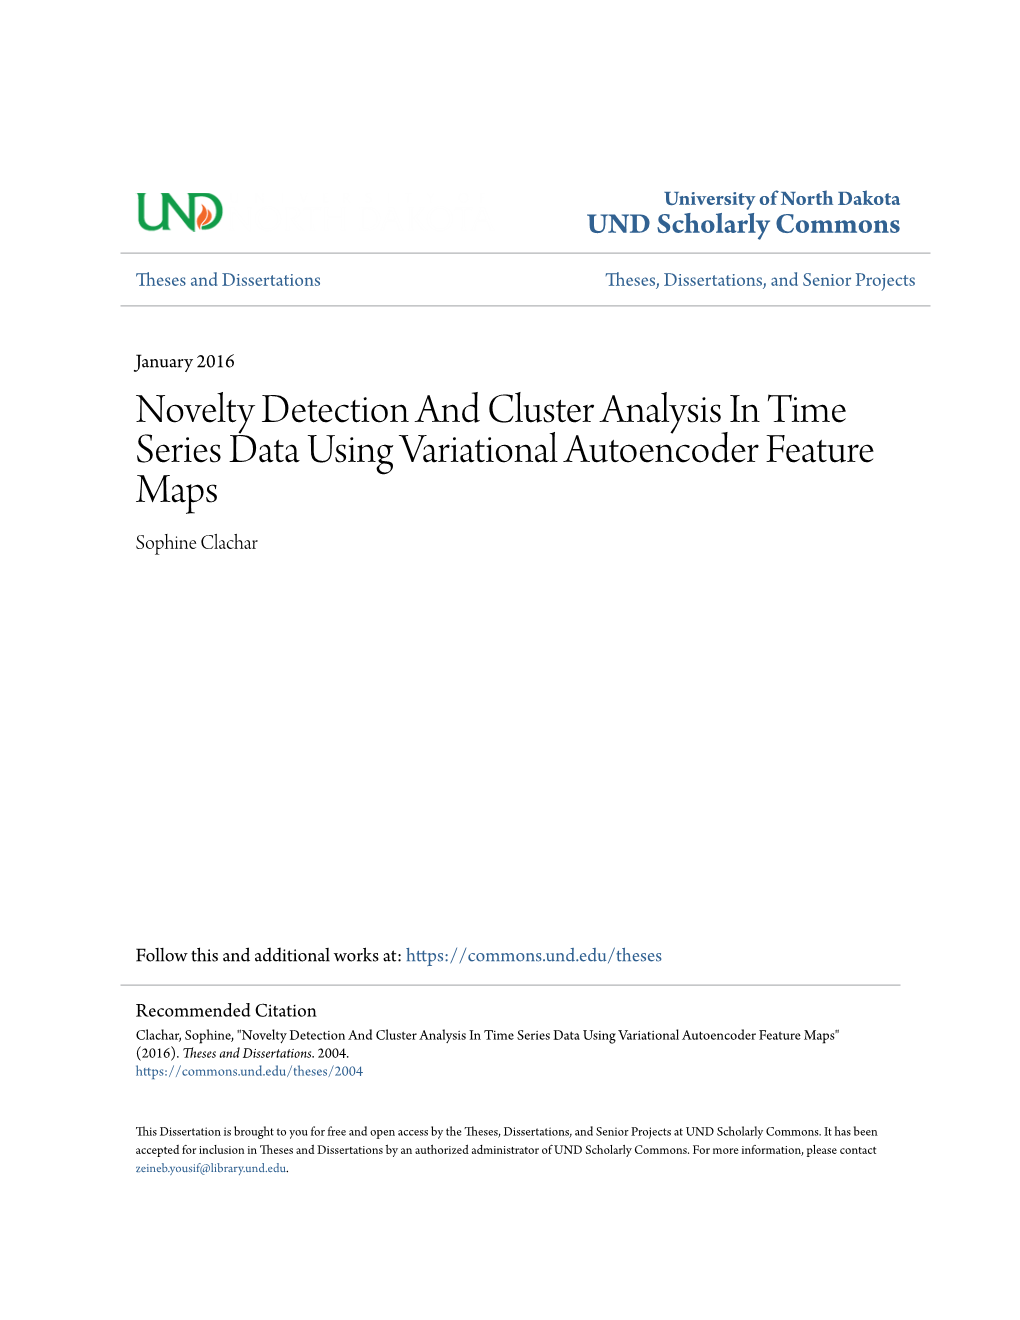 Novelty Detection and Cluster Analysis in Time Series Data Using Variational Autoencoder Feature Maps Sophine Clachar